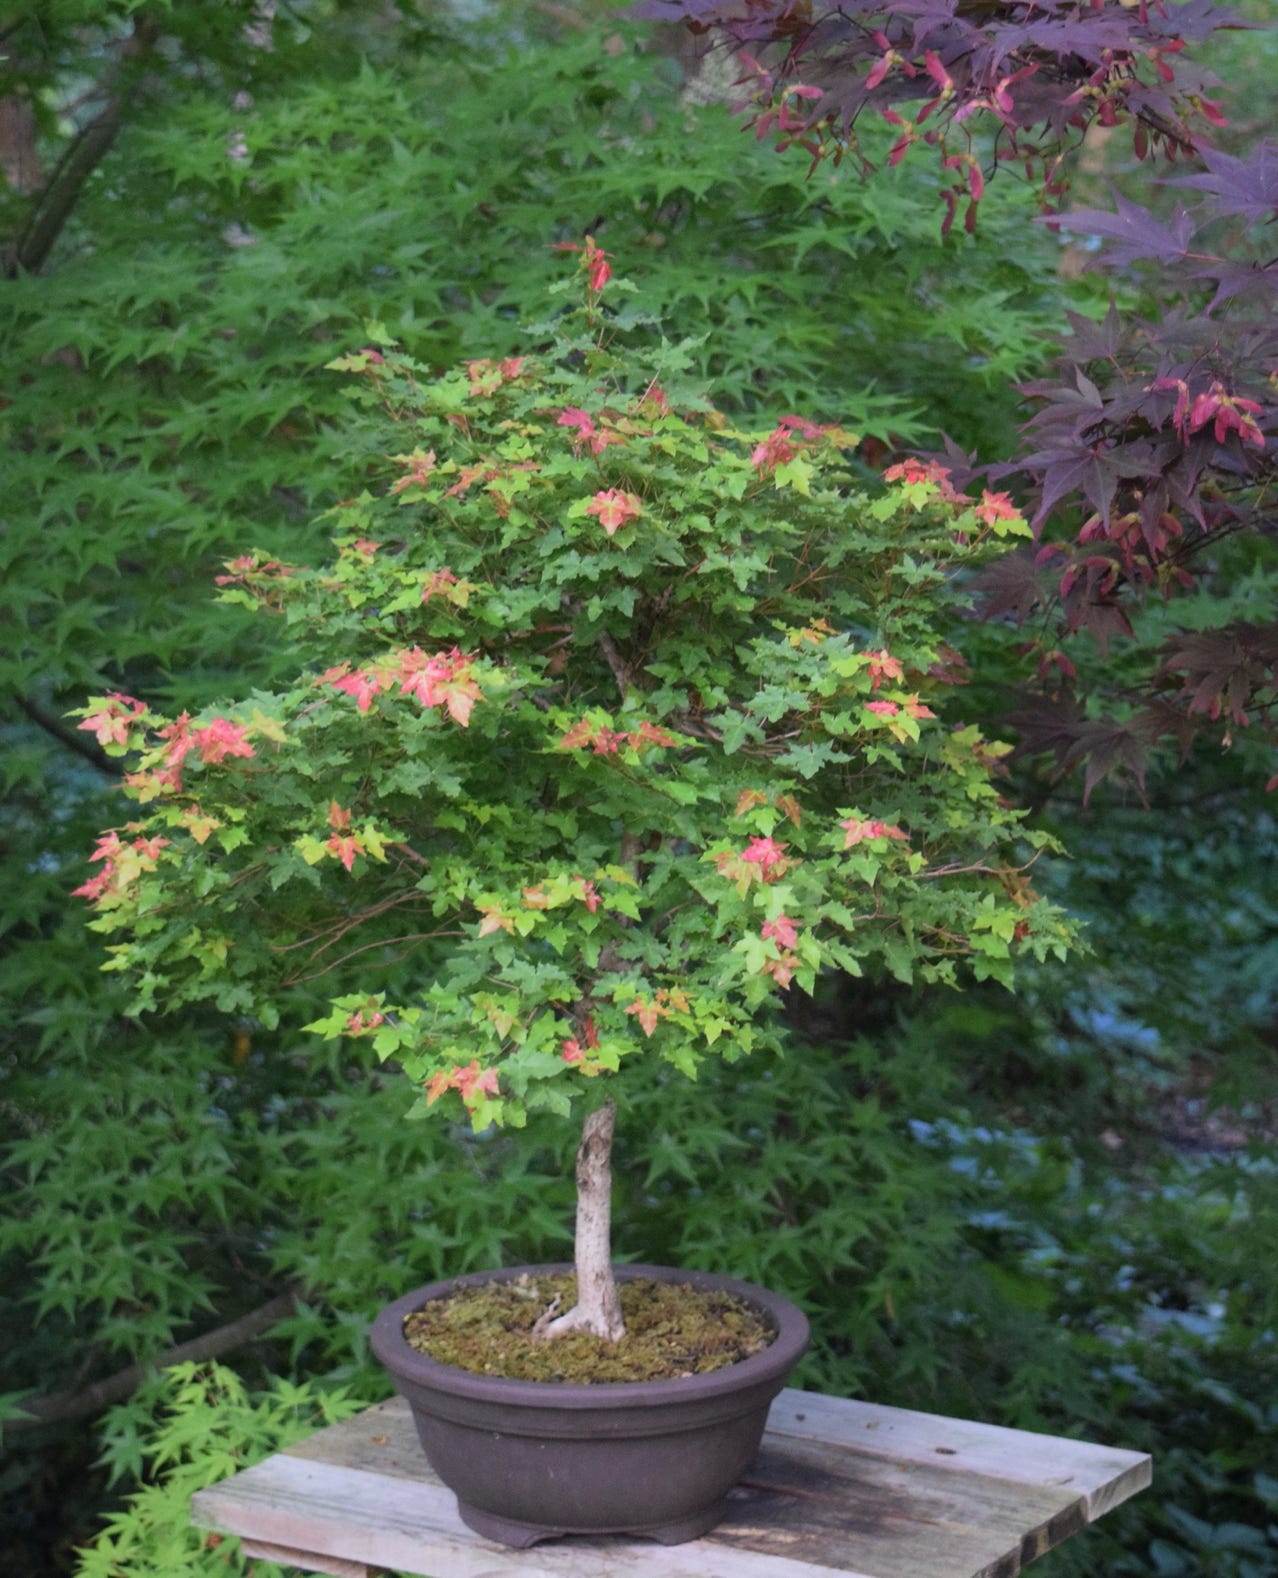 Acer truncatum Shandong or Shantung maple dwarf bonsai 9 years old.  Small maple leaves.